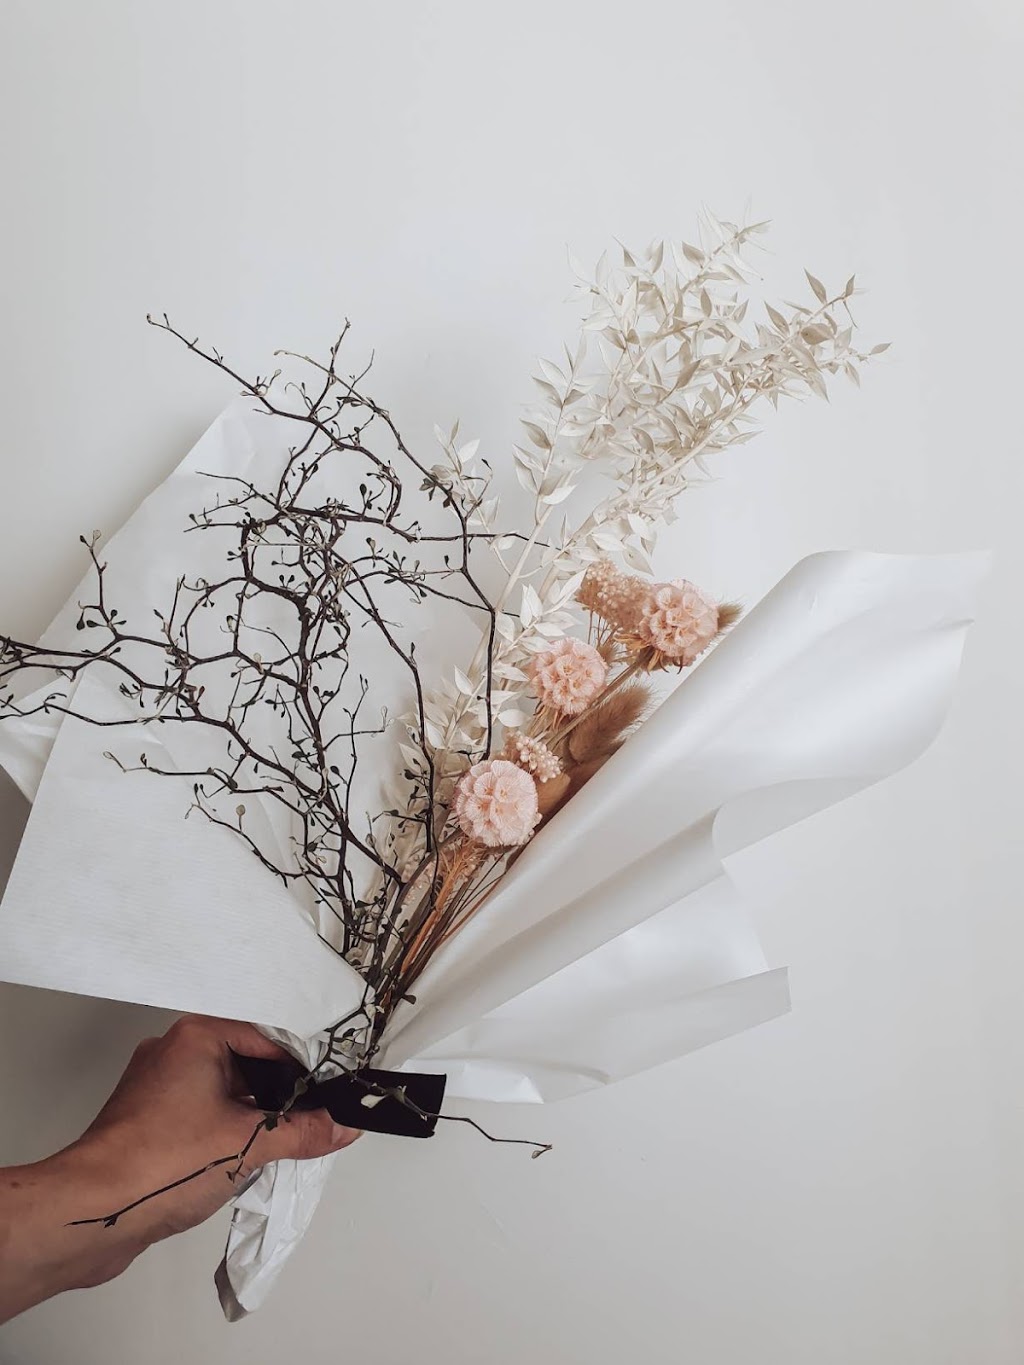 Eden & Bell - Floral Design and Event Styling | florist | 13 Margate St, Ramsgate NSW 2217, Australia